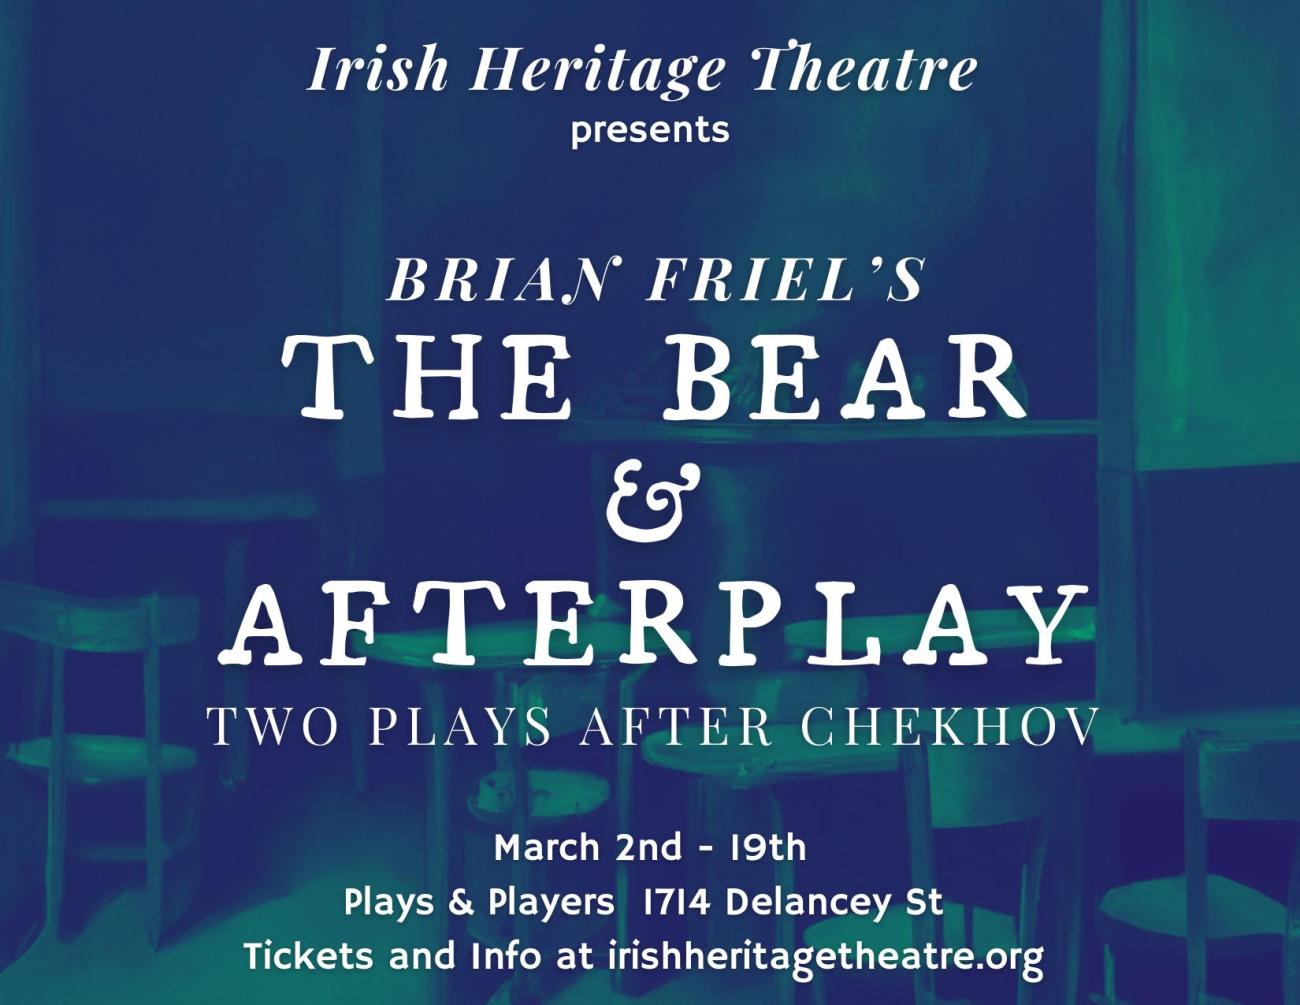 Plays and Players Theatre — Visit Philadelphia